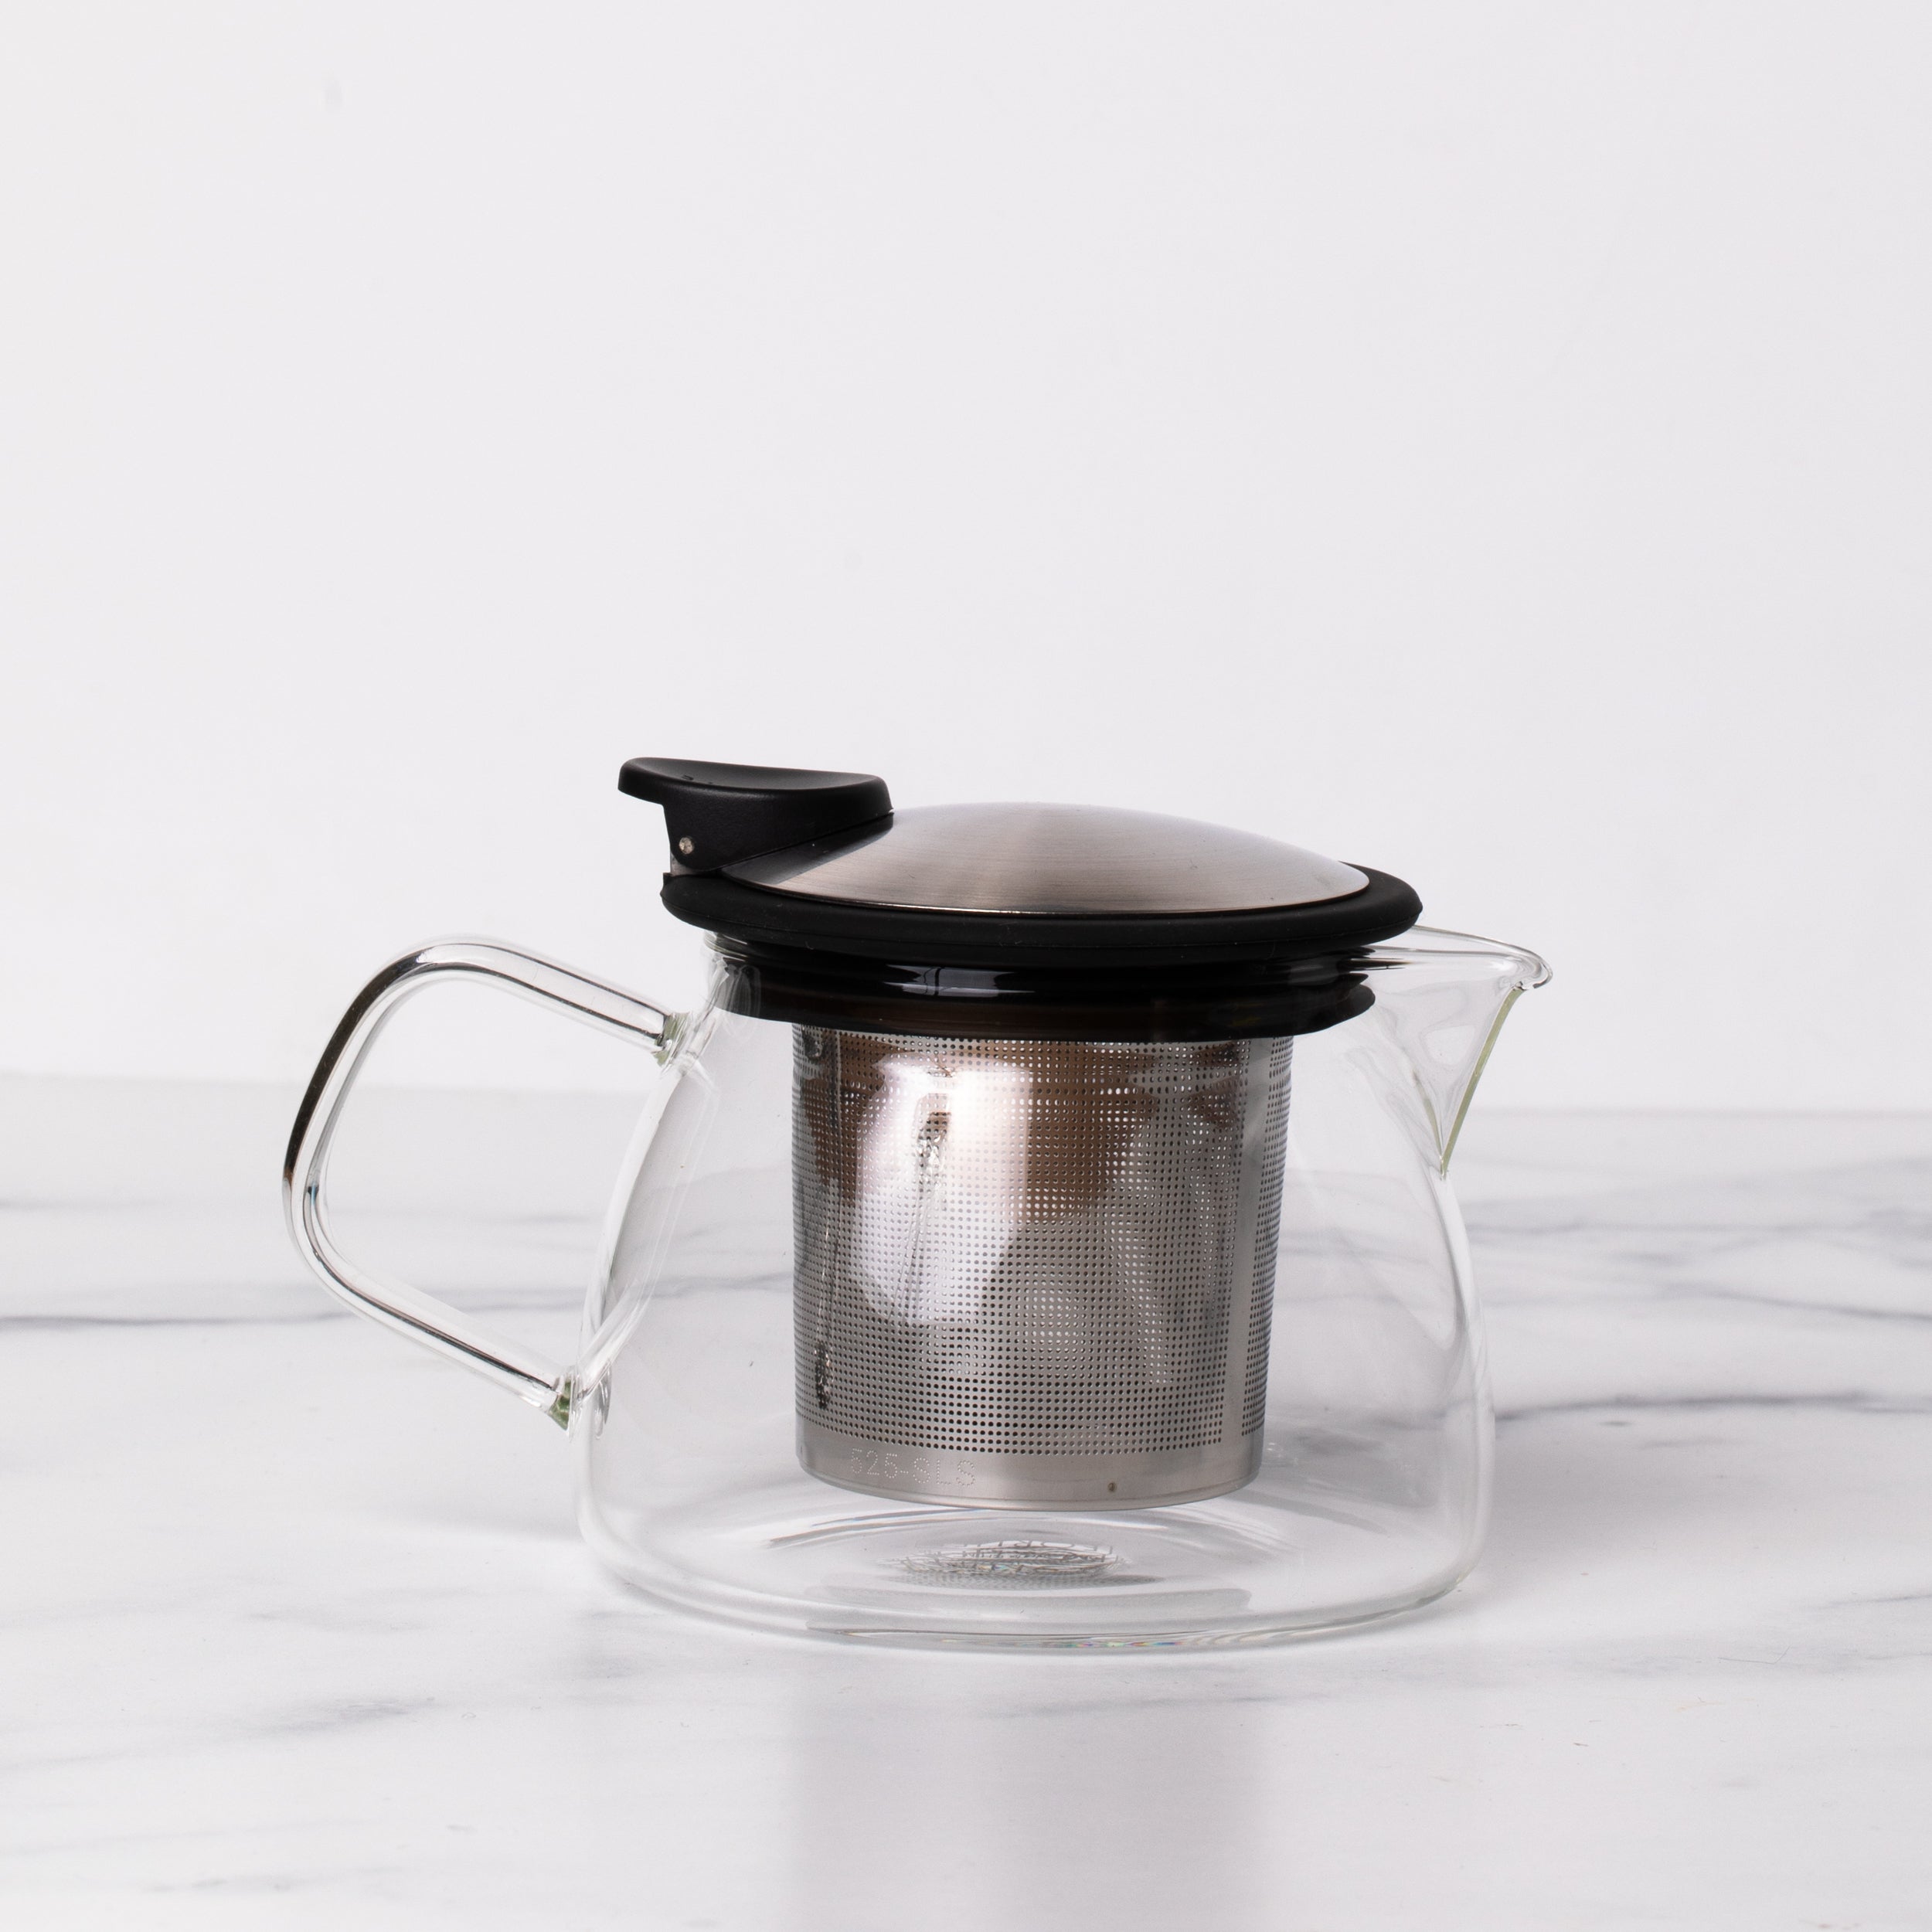 Glass teapot with stainless steel and black lid with spout and handle.